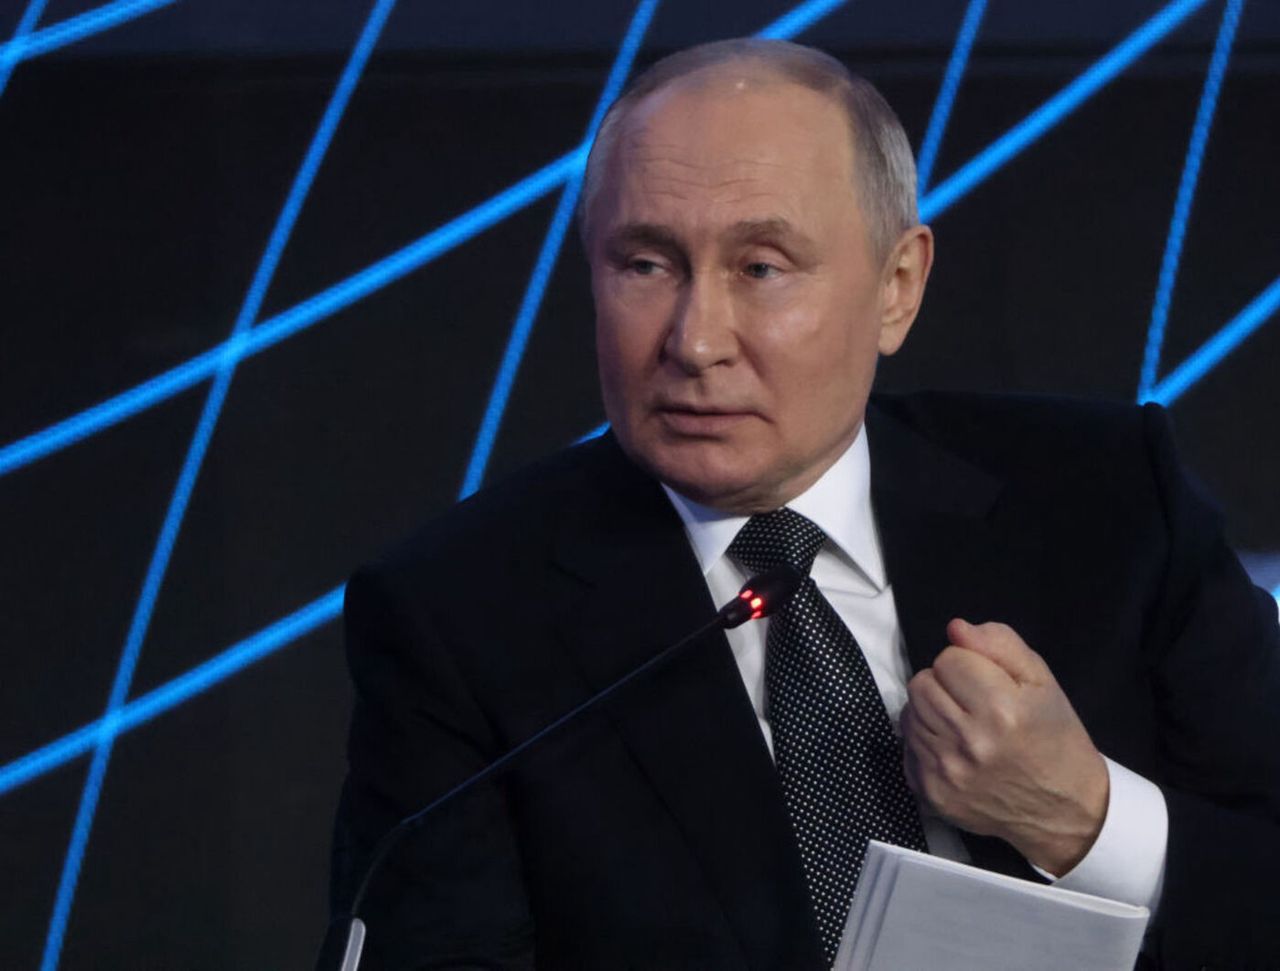 Amid health controversy, historian suggests Putin's longevity tied to mother's sturdy genetics